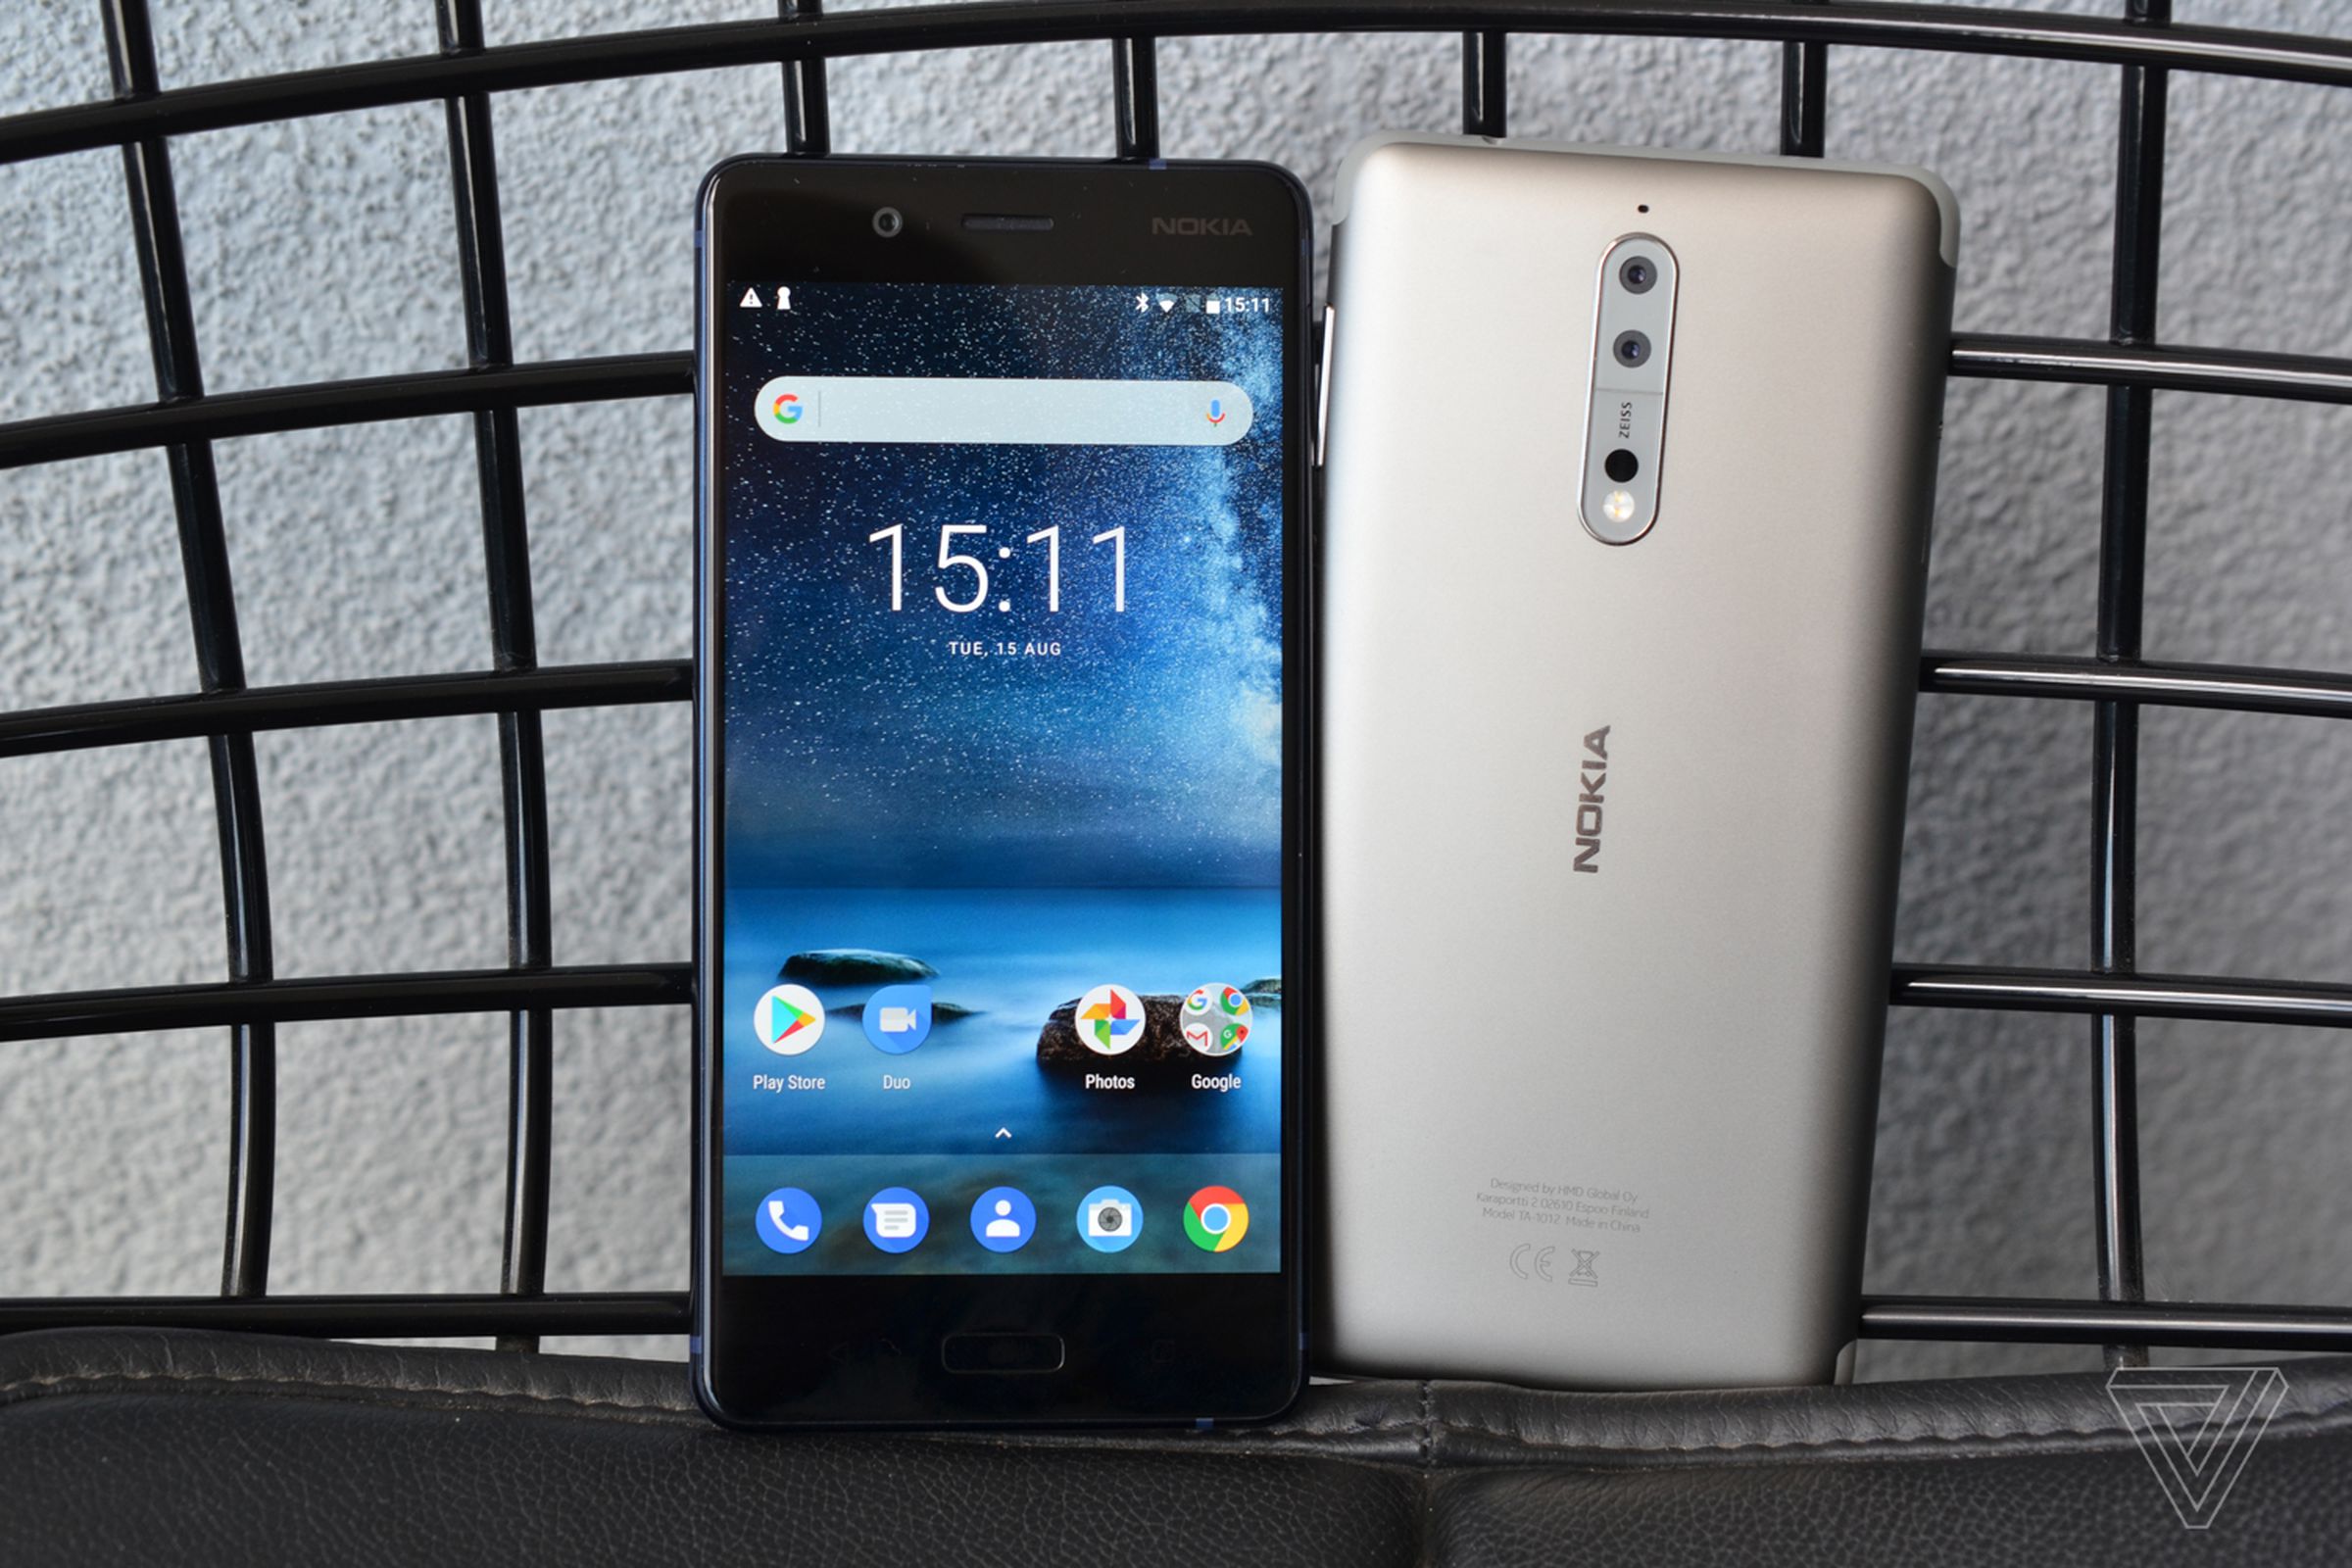 Nokia 8 Android phone